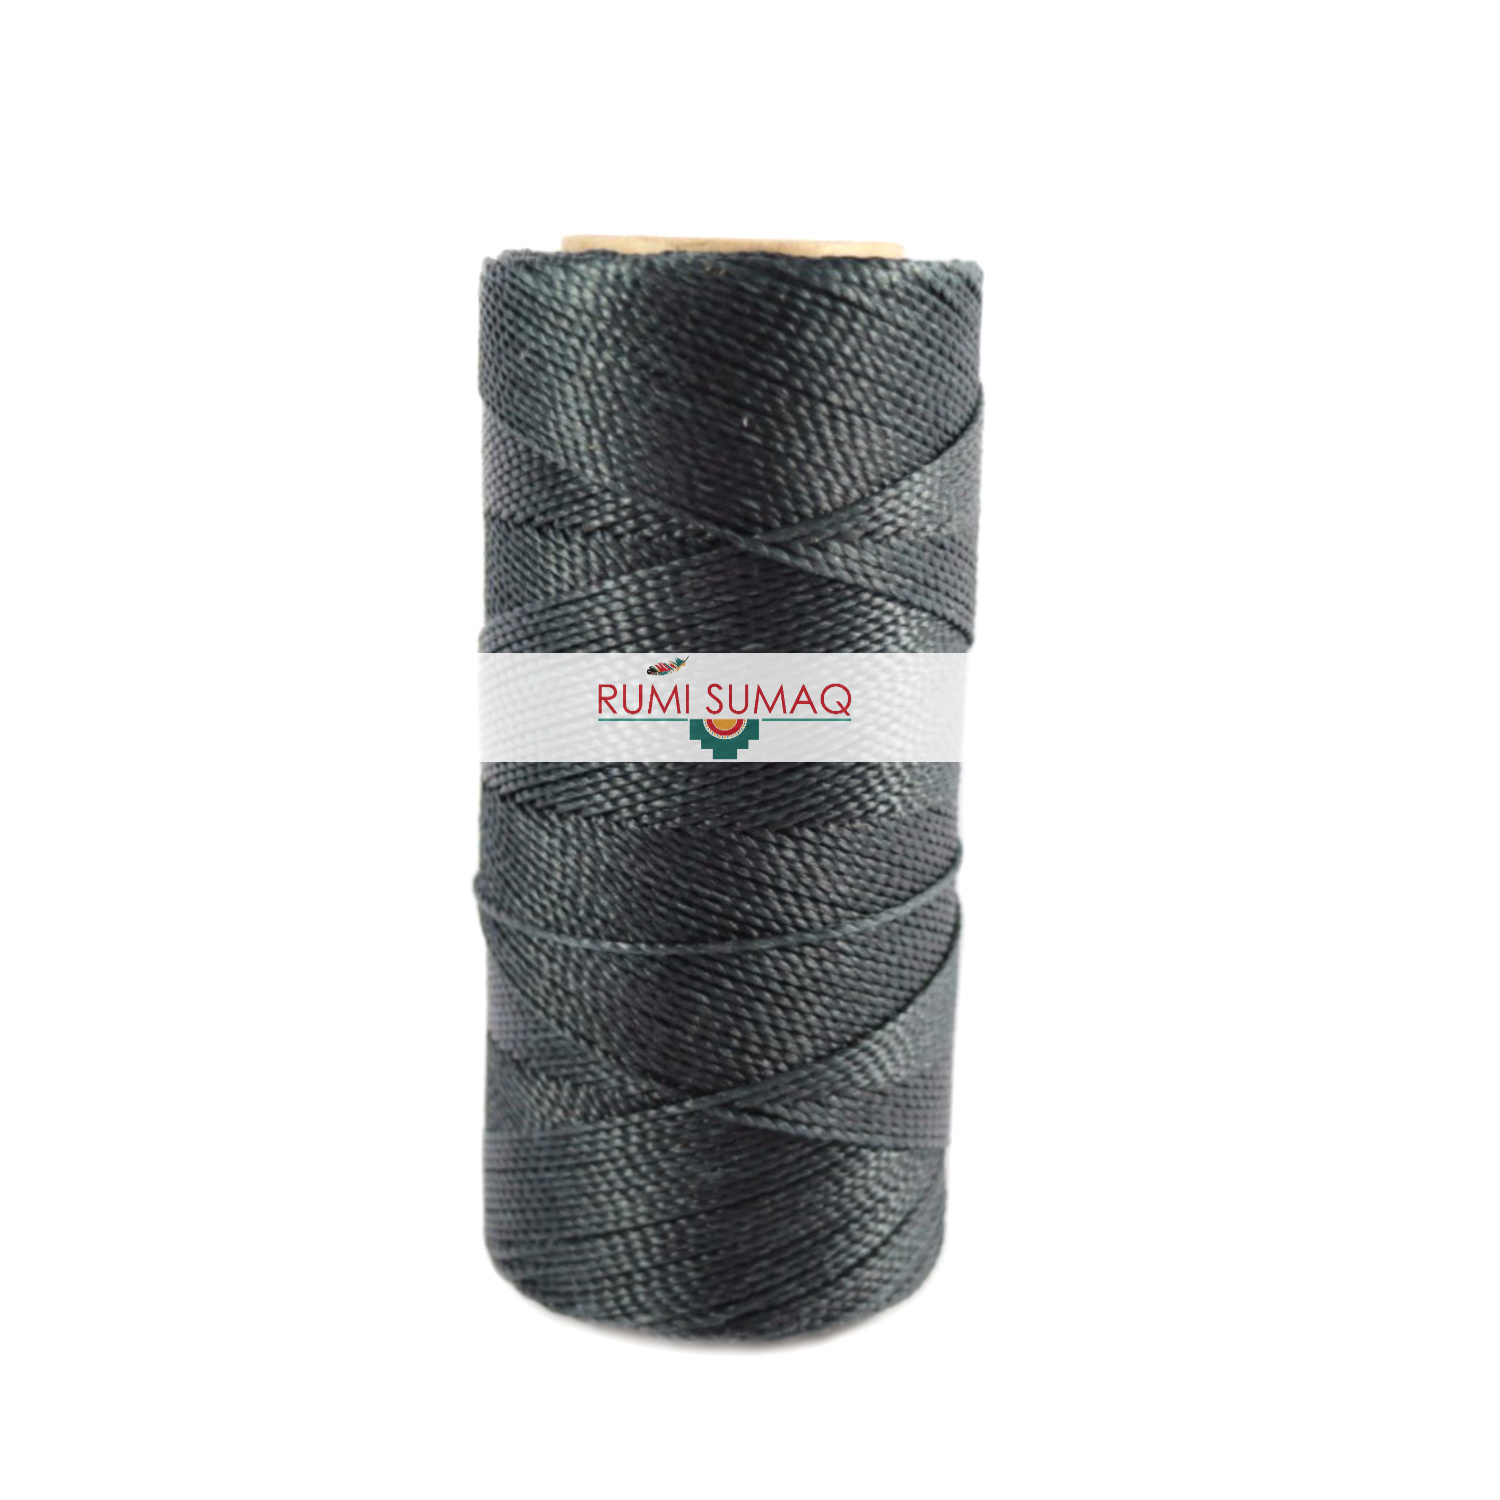 Find 1mm Linhasita 691 Dark Blue Gray 2-ply waxed polyester cord at RUMI SUMAQ, the premier retailer for waxed cords for beading, basketry, knotting jewelry, quilting